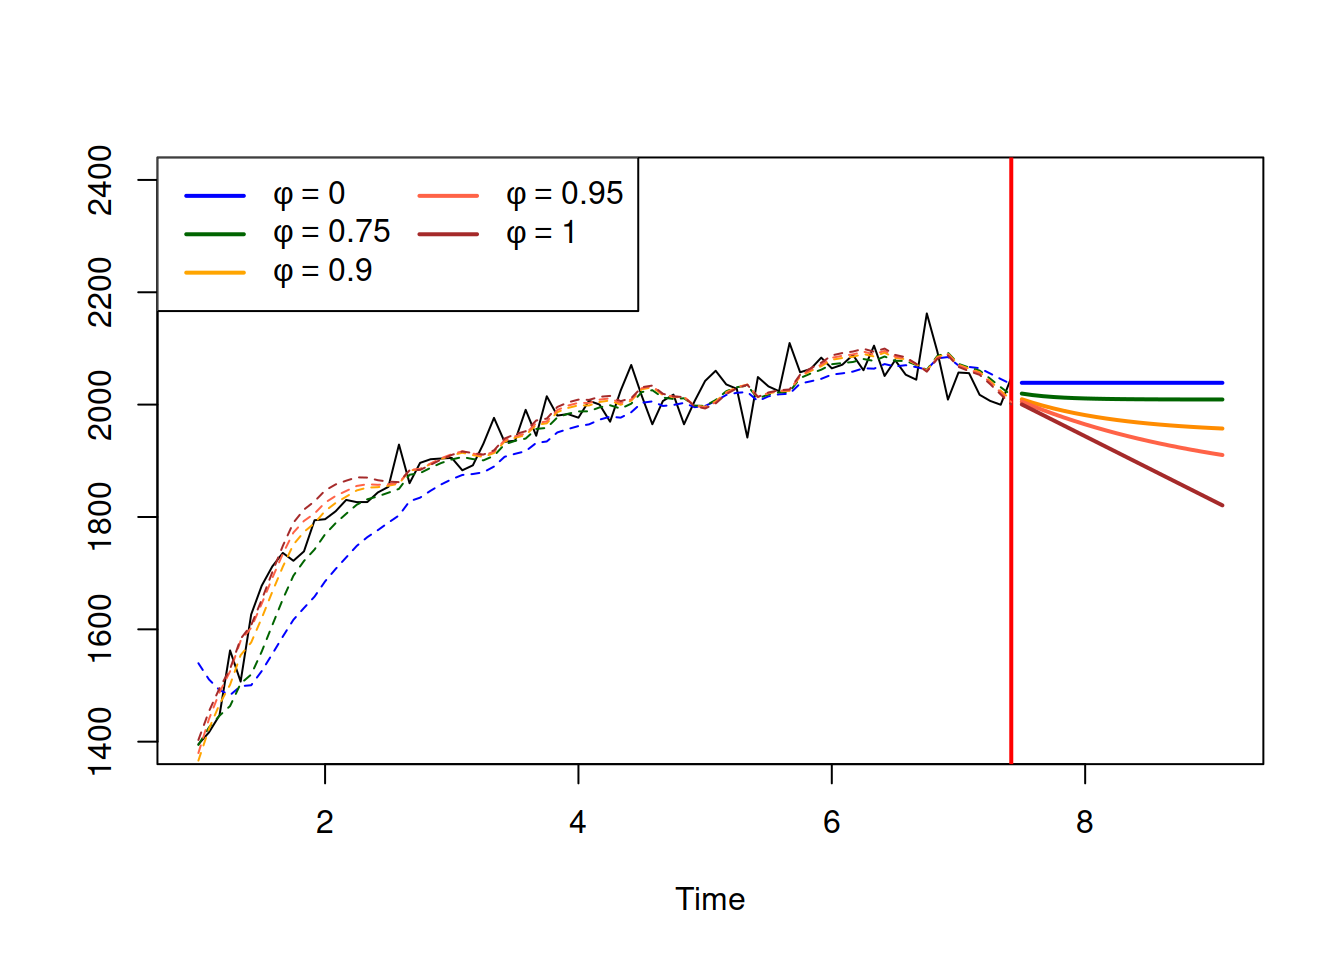 ETS(A,Ad,N) applied to some generated data with different values of dampening parameter.